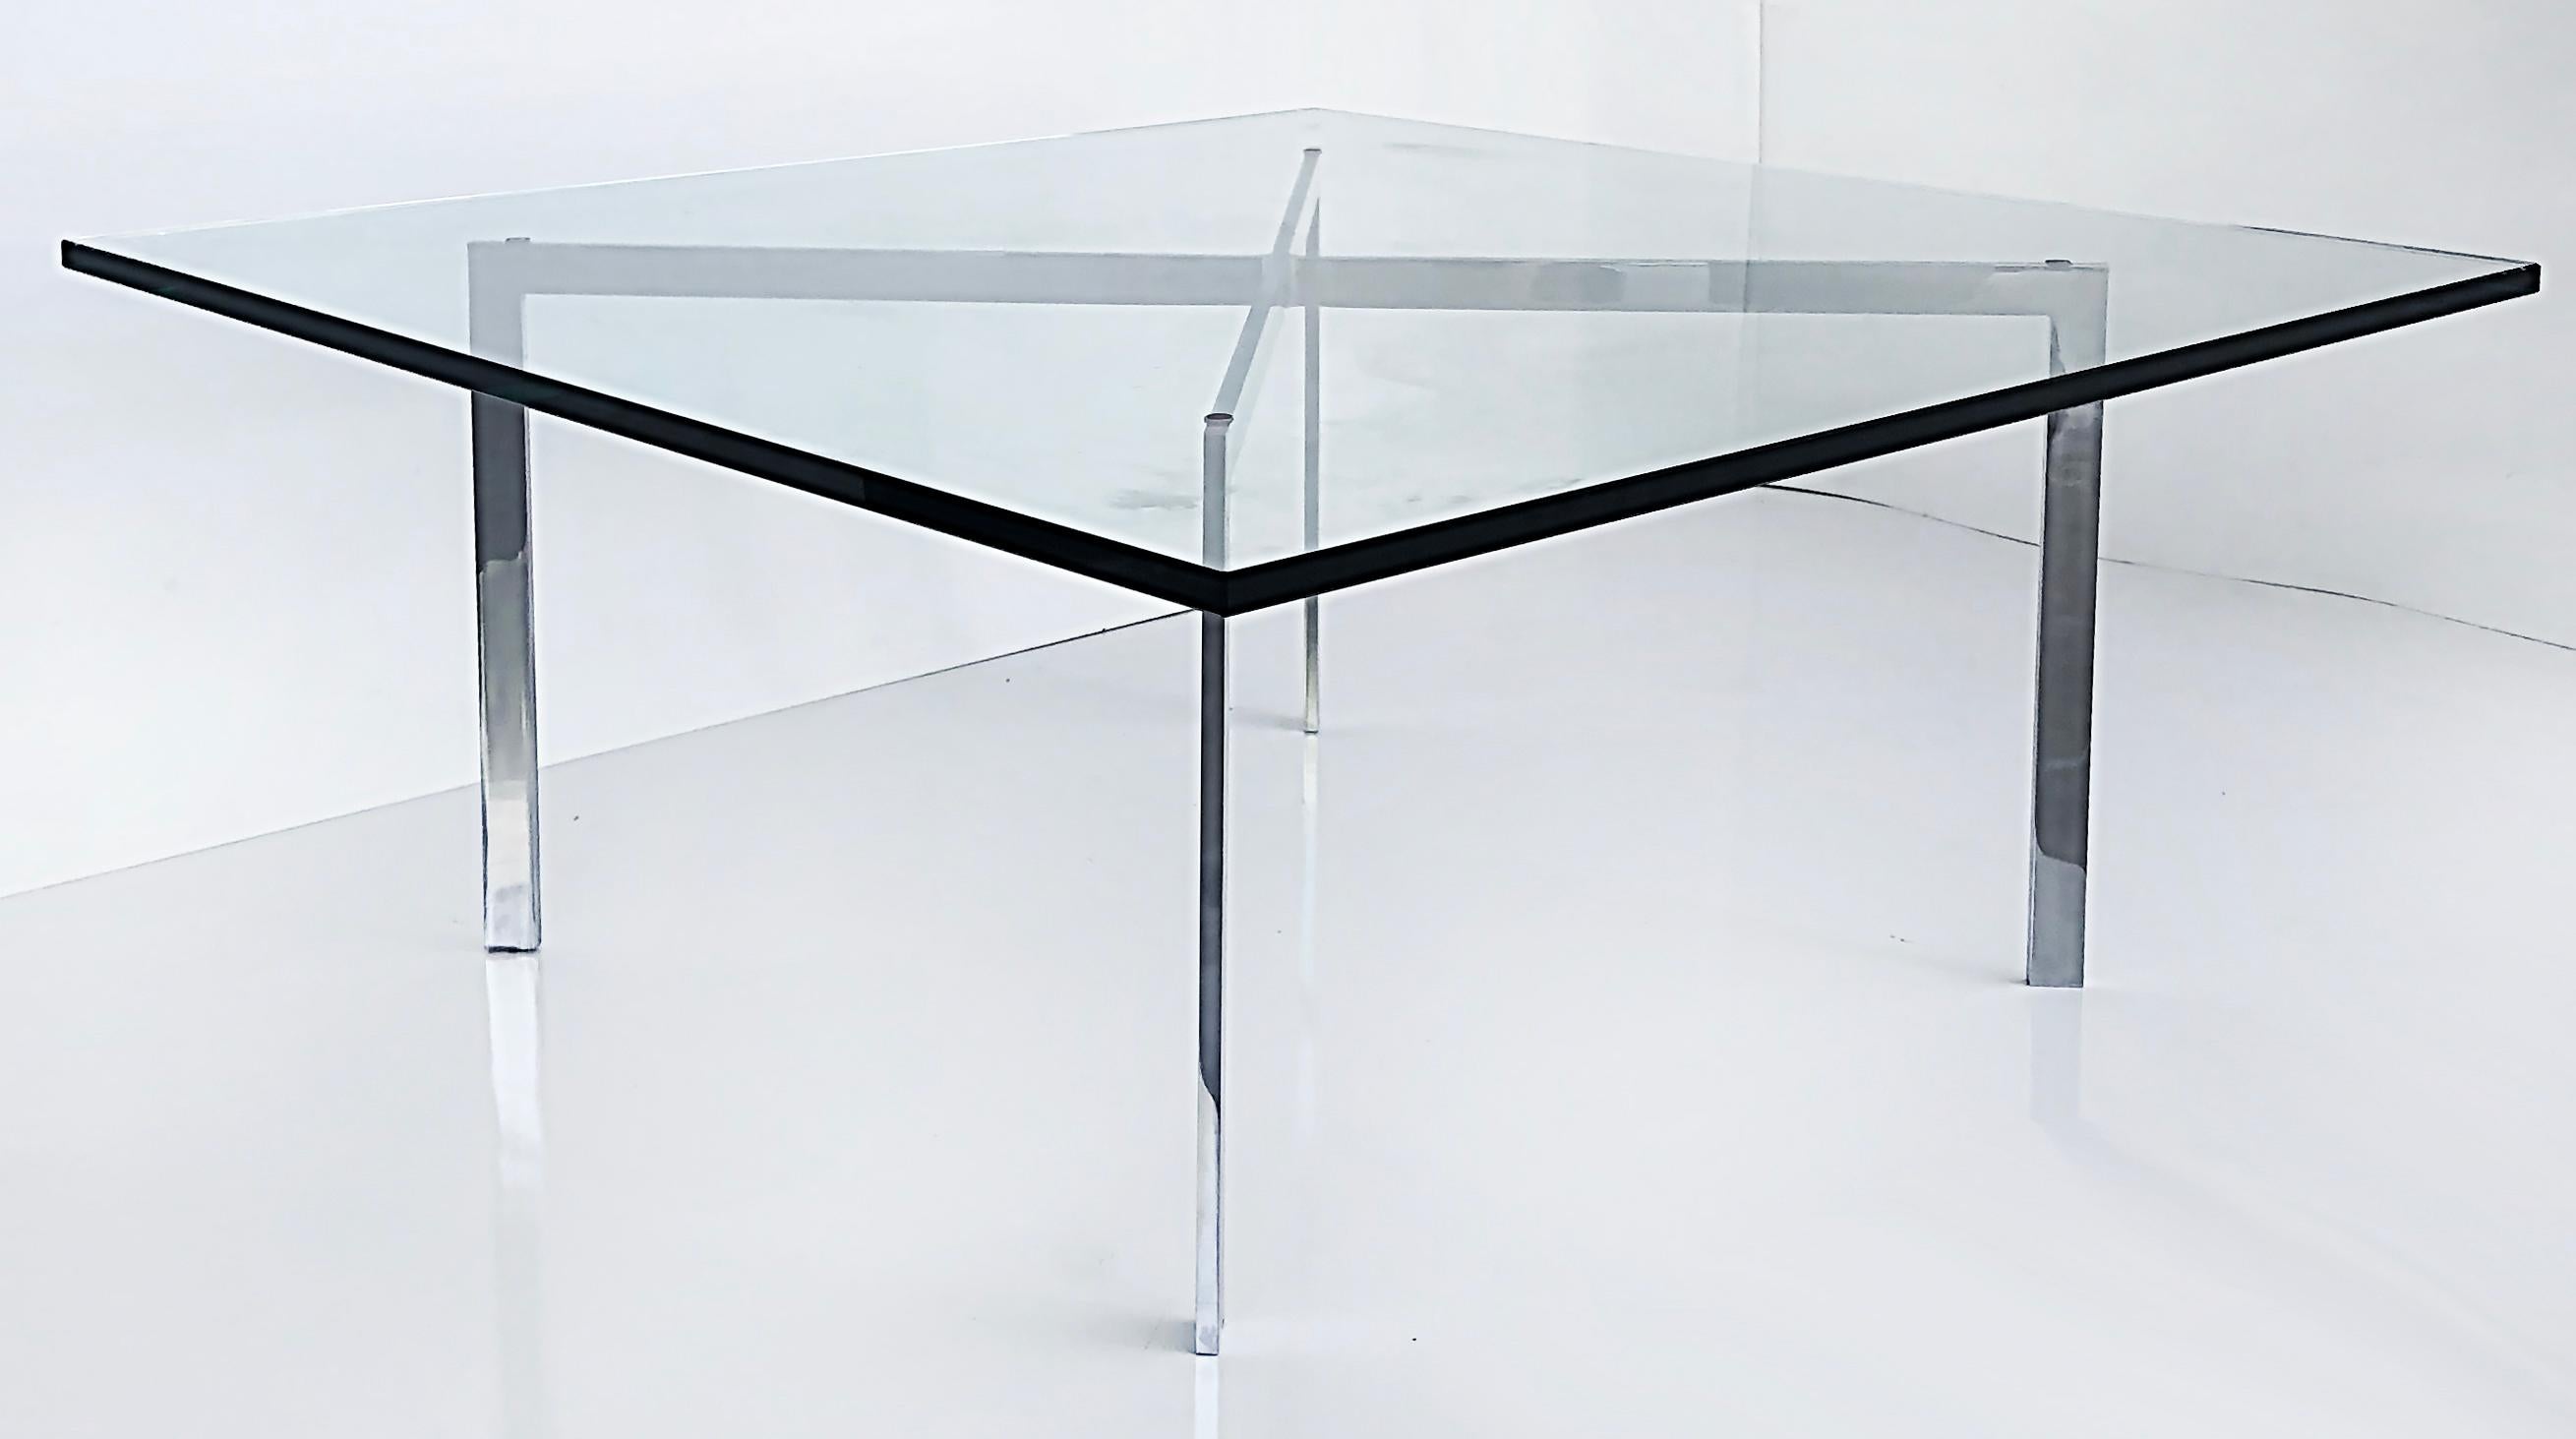 Mies Van der Rohe Knoll Studio Barcelona coffee table with glass top

Offered for sale is a Knoll Studio Mies Van der Rohe Barcelona coffee table with a substantial glass top. The frame is signed within the leg as shown. We have two of these